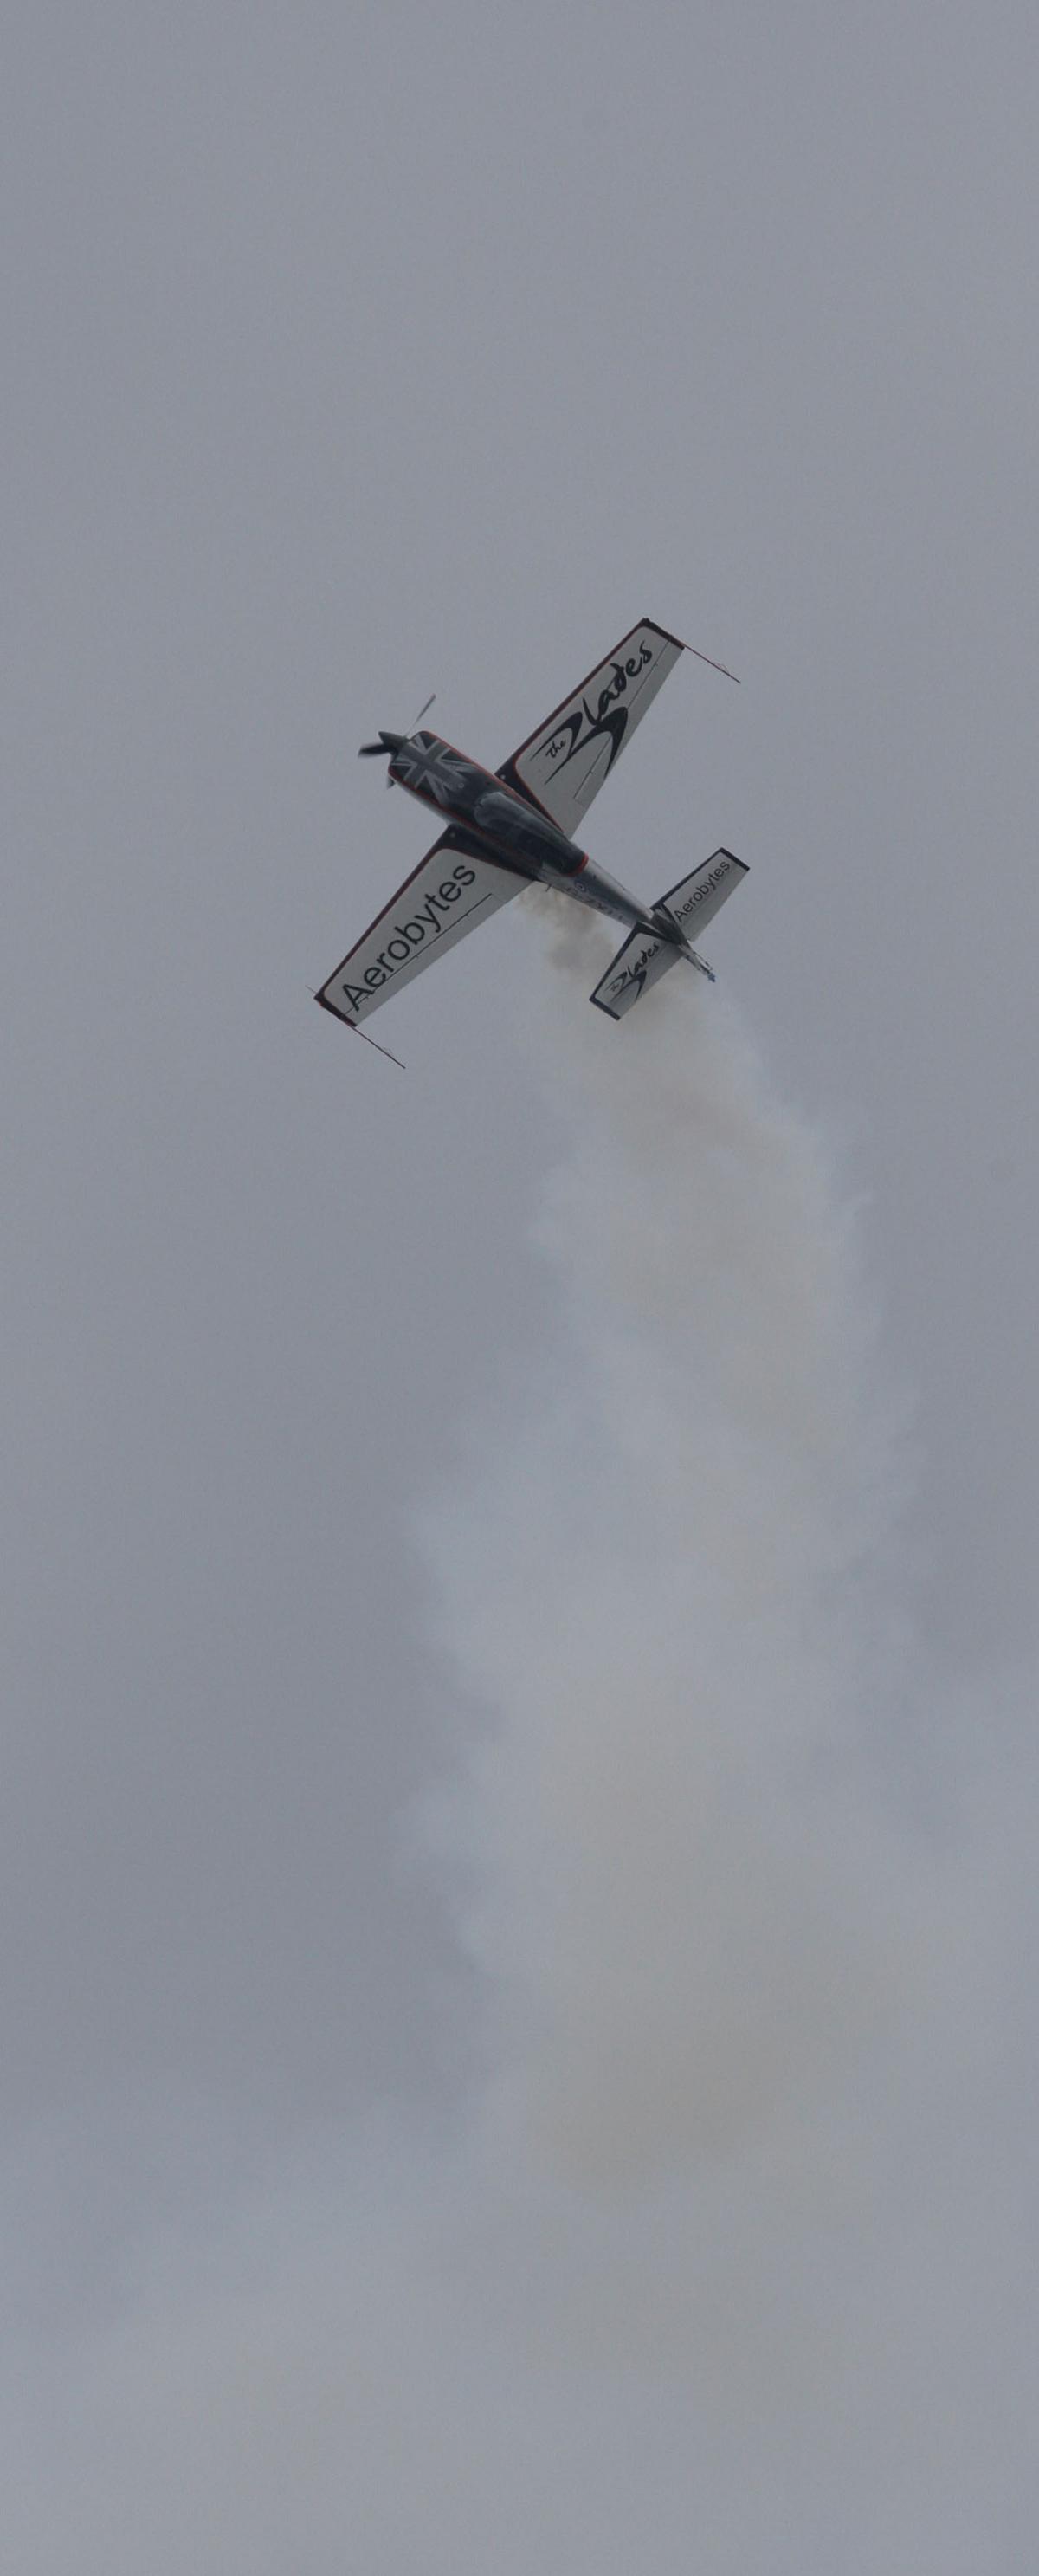 Day three at the Bournemouth Air Festival 2015. Pictures by Corin Messer. 